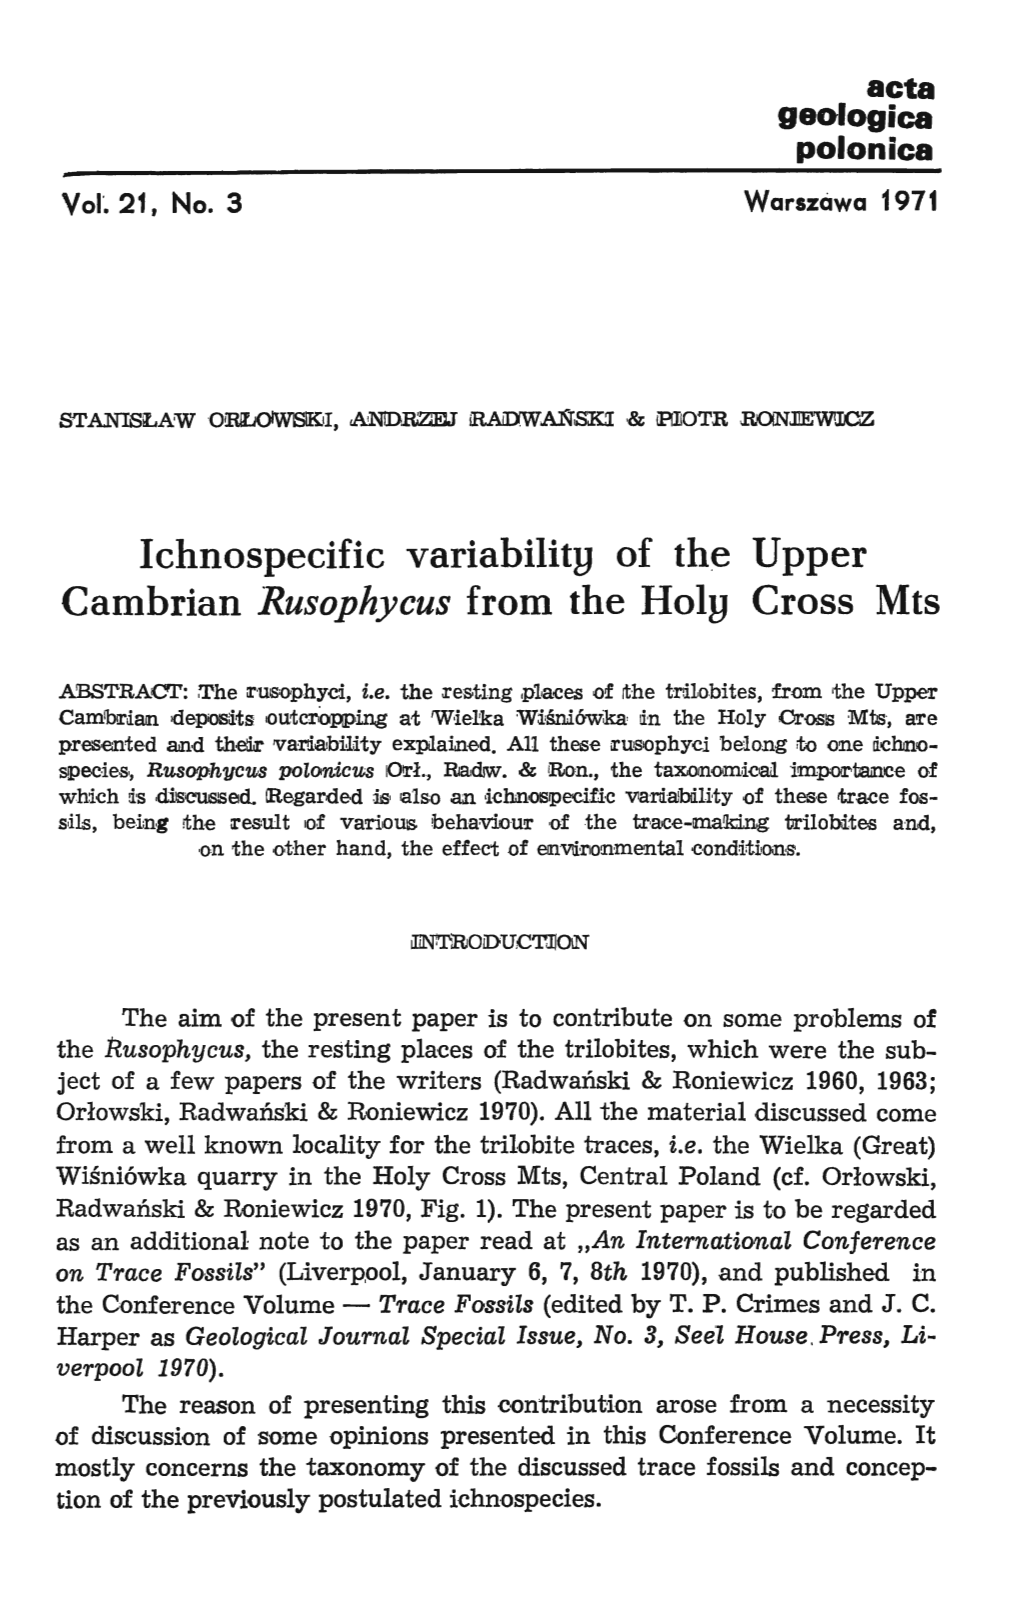 Ichnospecific Variability of the Upper Cambrian Rusophycus from the Holy Cross Mts